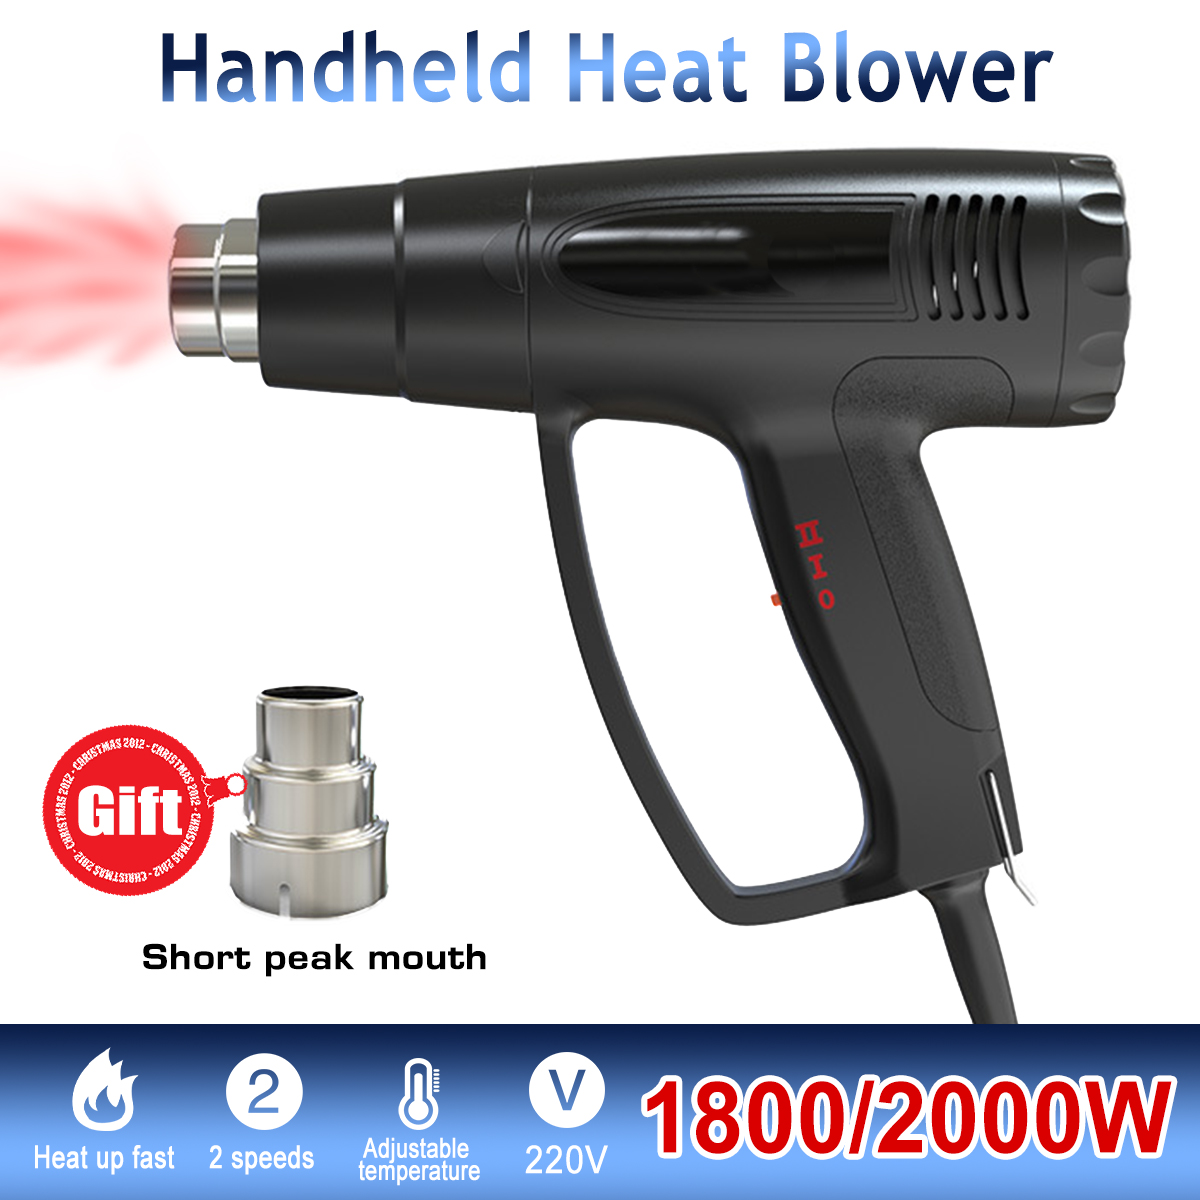 1800W-2000W-220V-Fast-Heating-Heat-Hot-Air-Rework-Station-Powered-600-Dual-Temperature-with-Nozzles-1628664-2